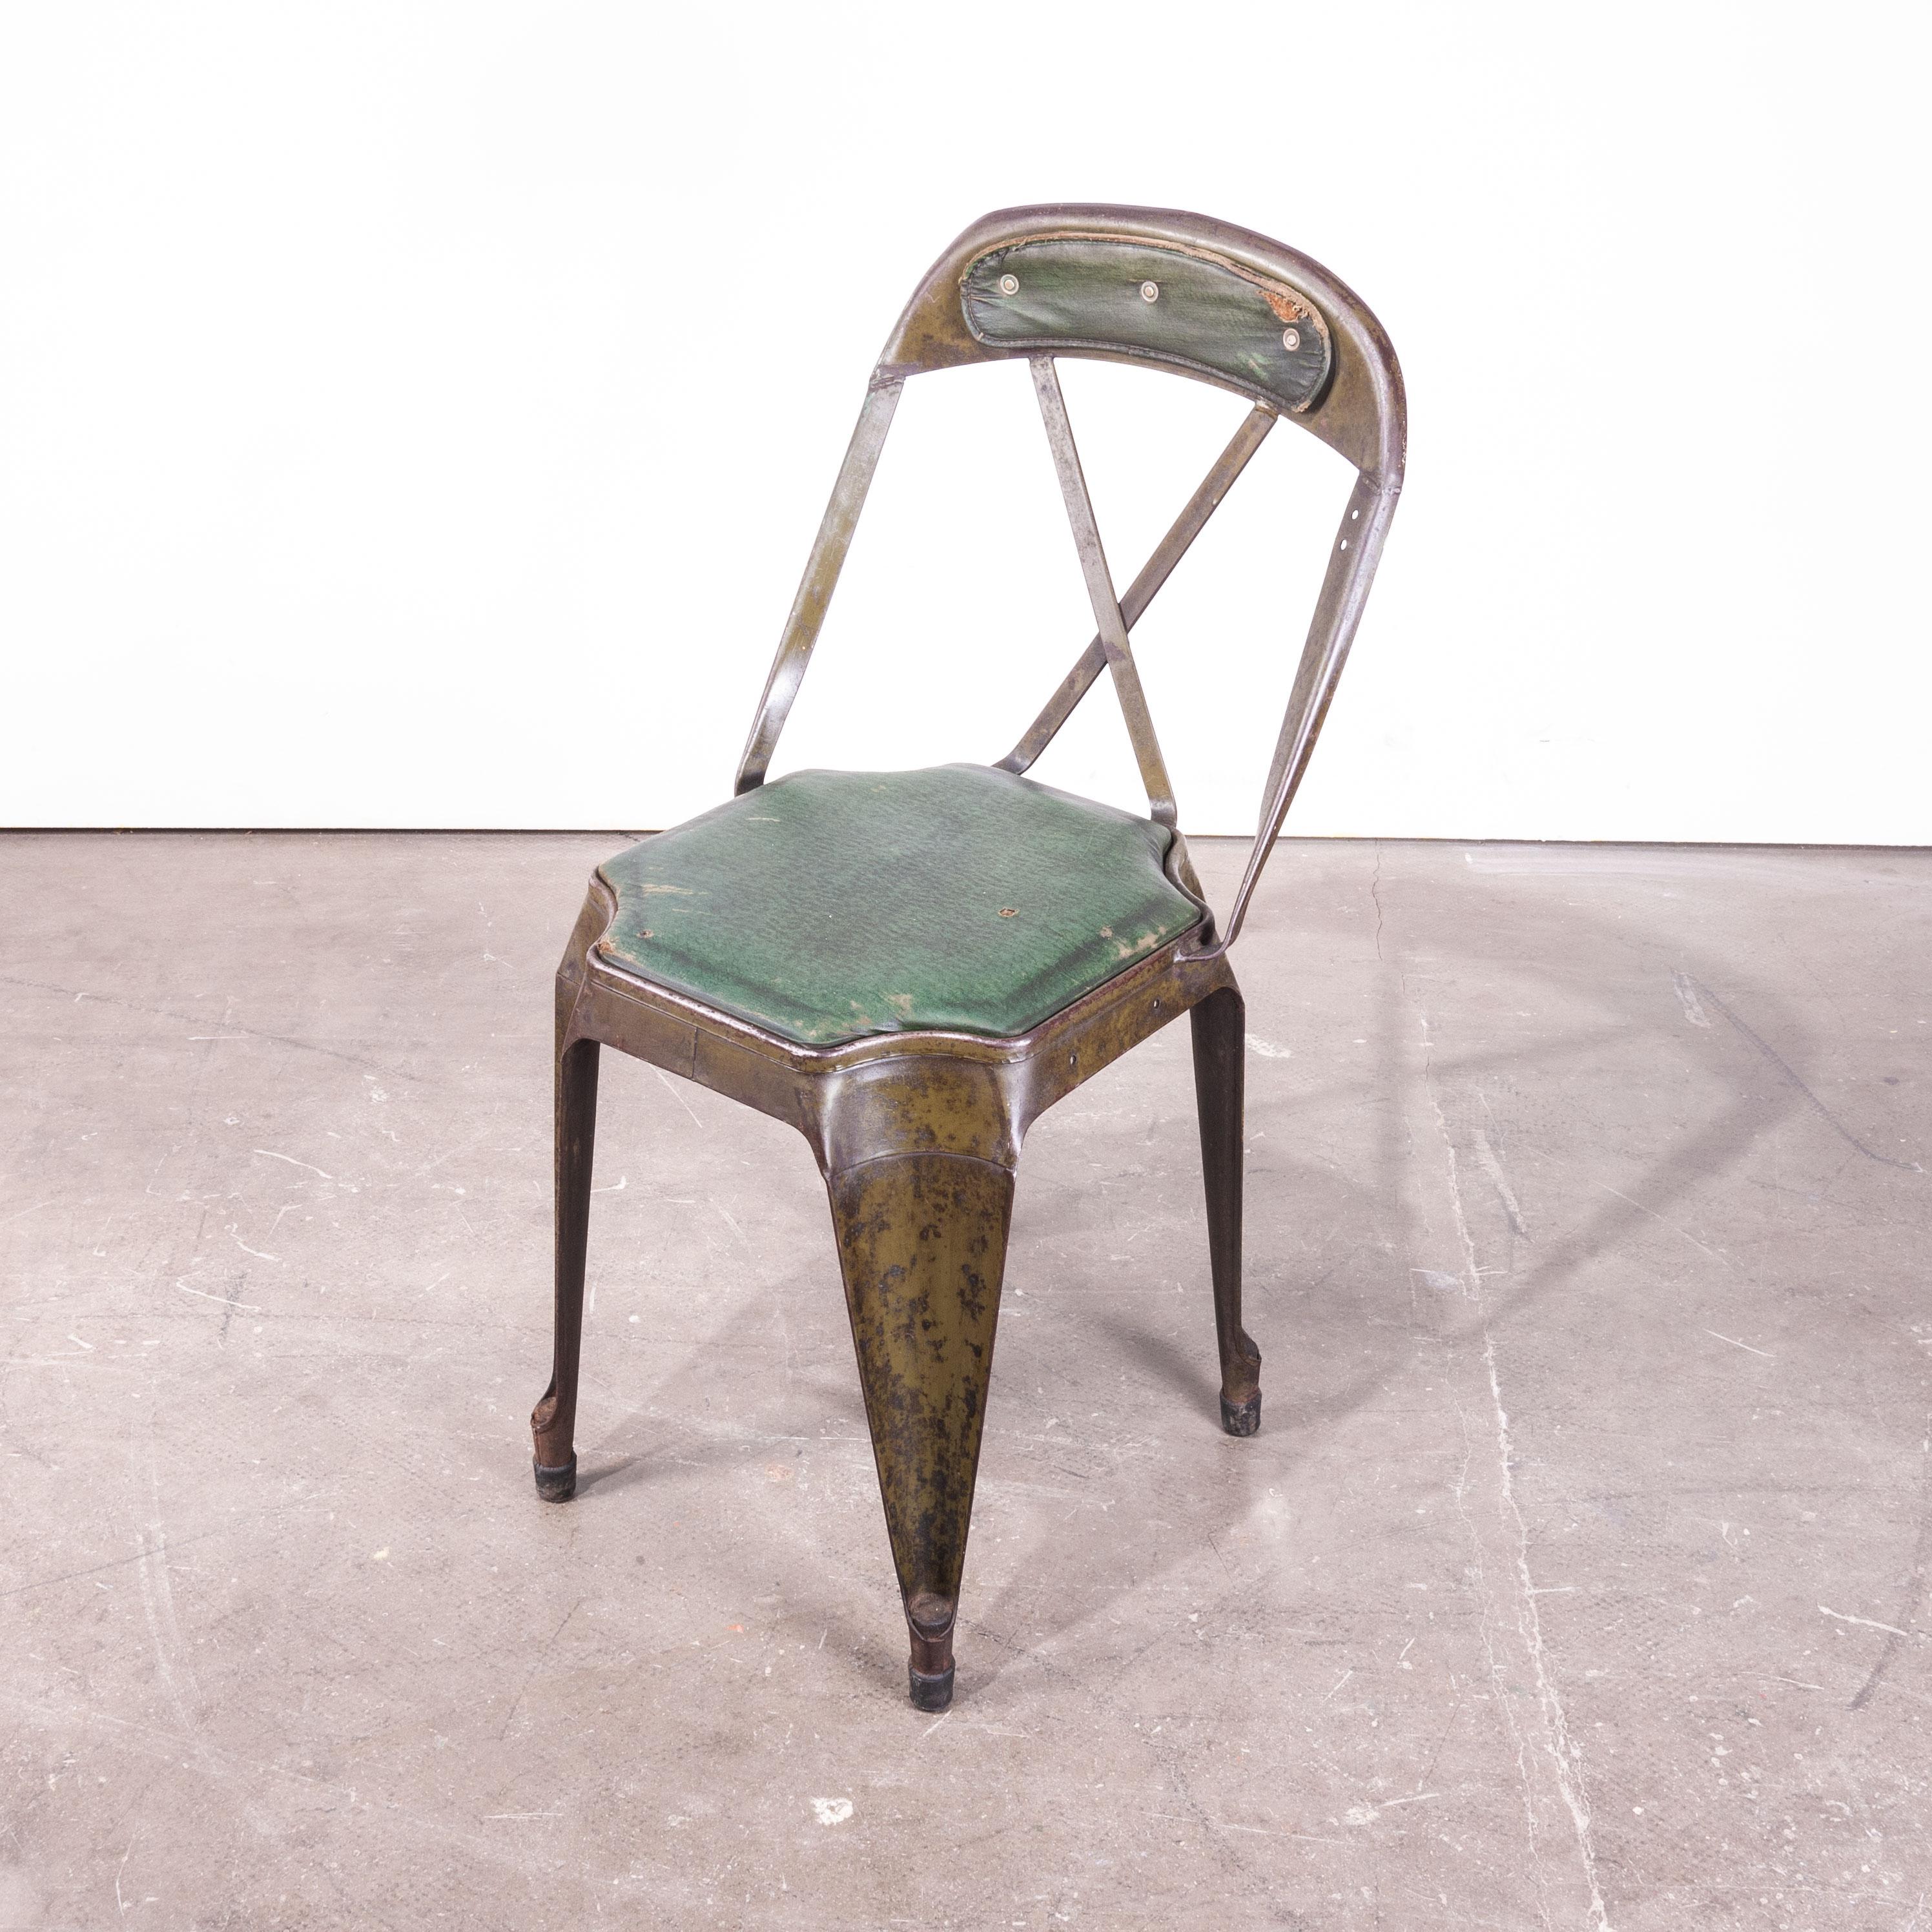 Steel 1930s Evertaut Cross Back Dining Chair For Sale